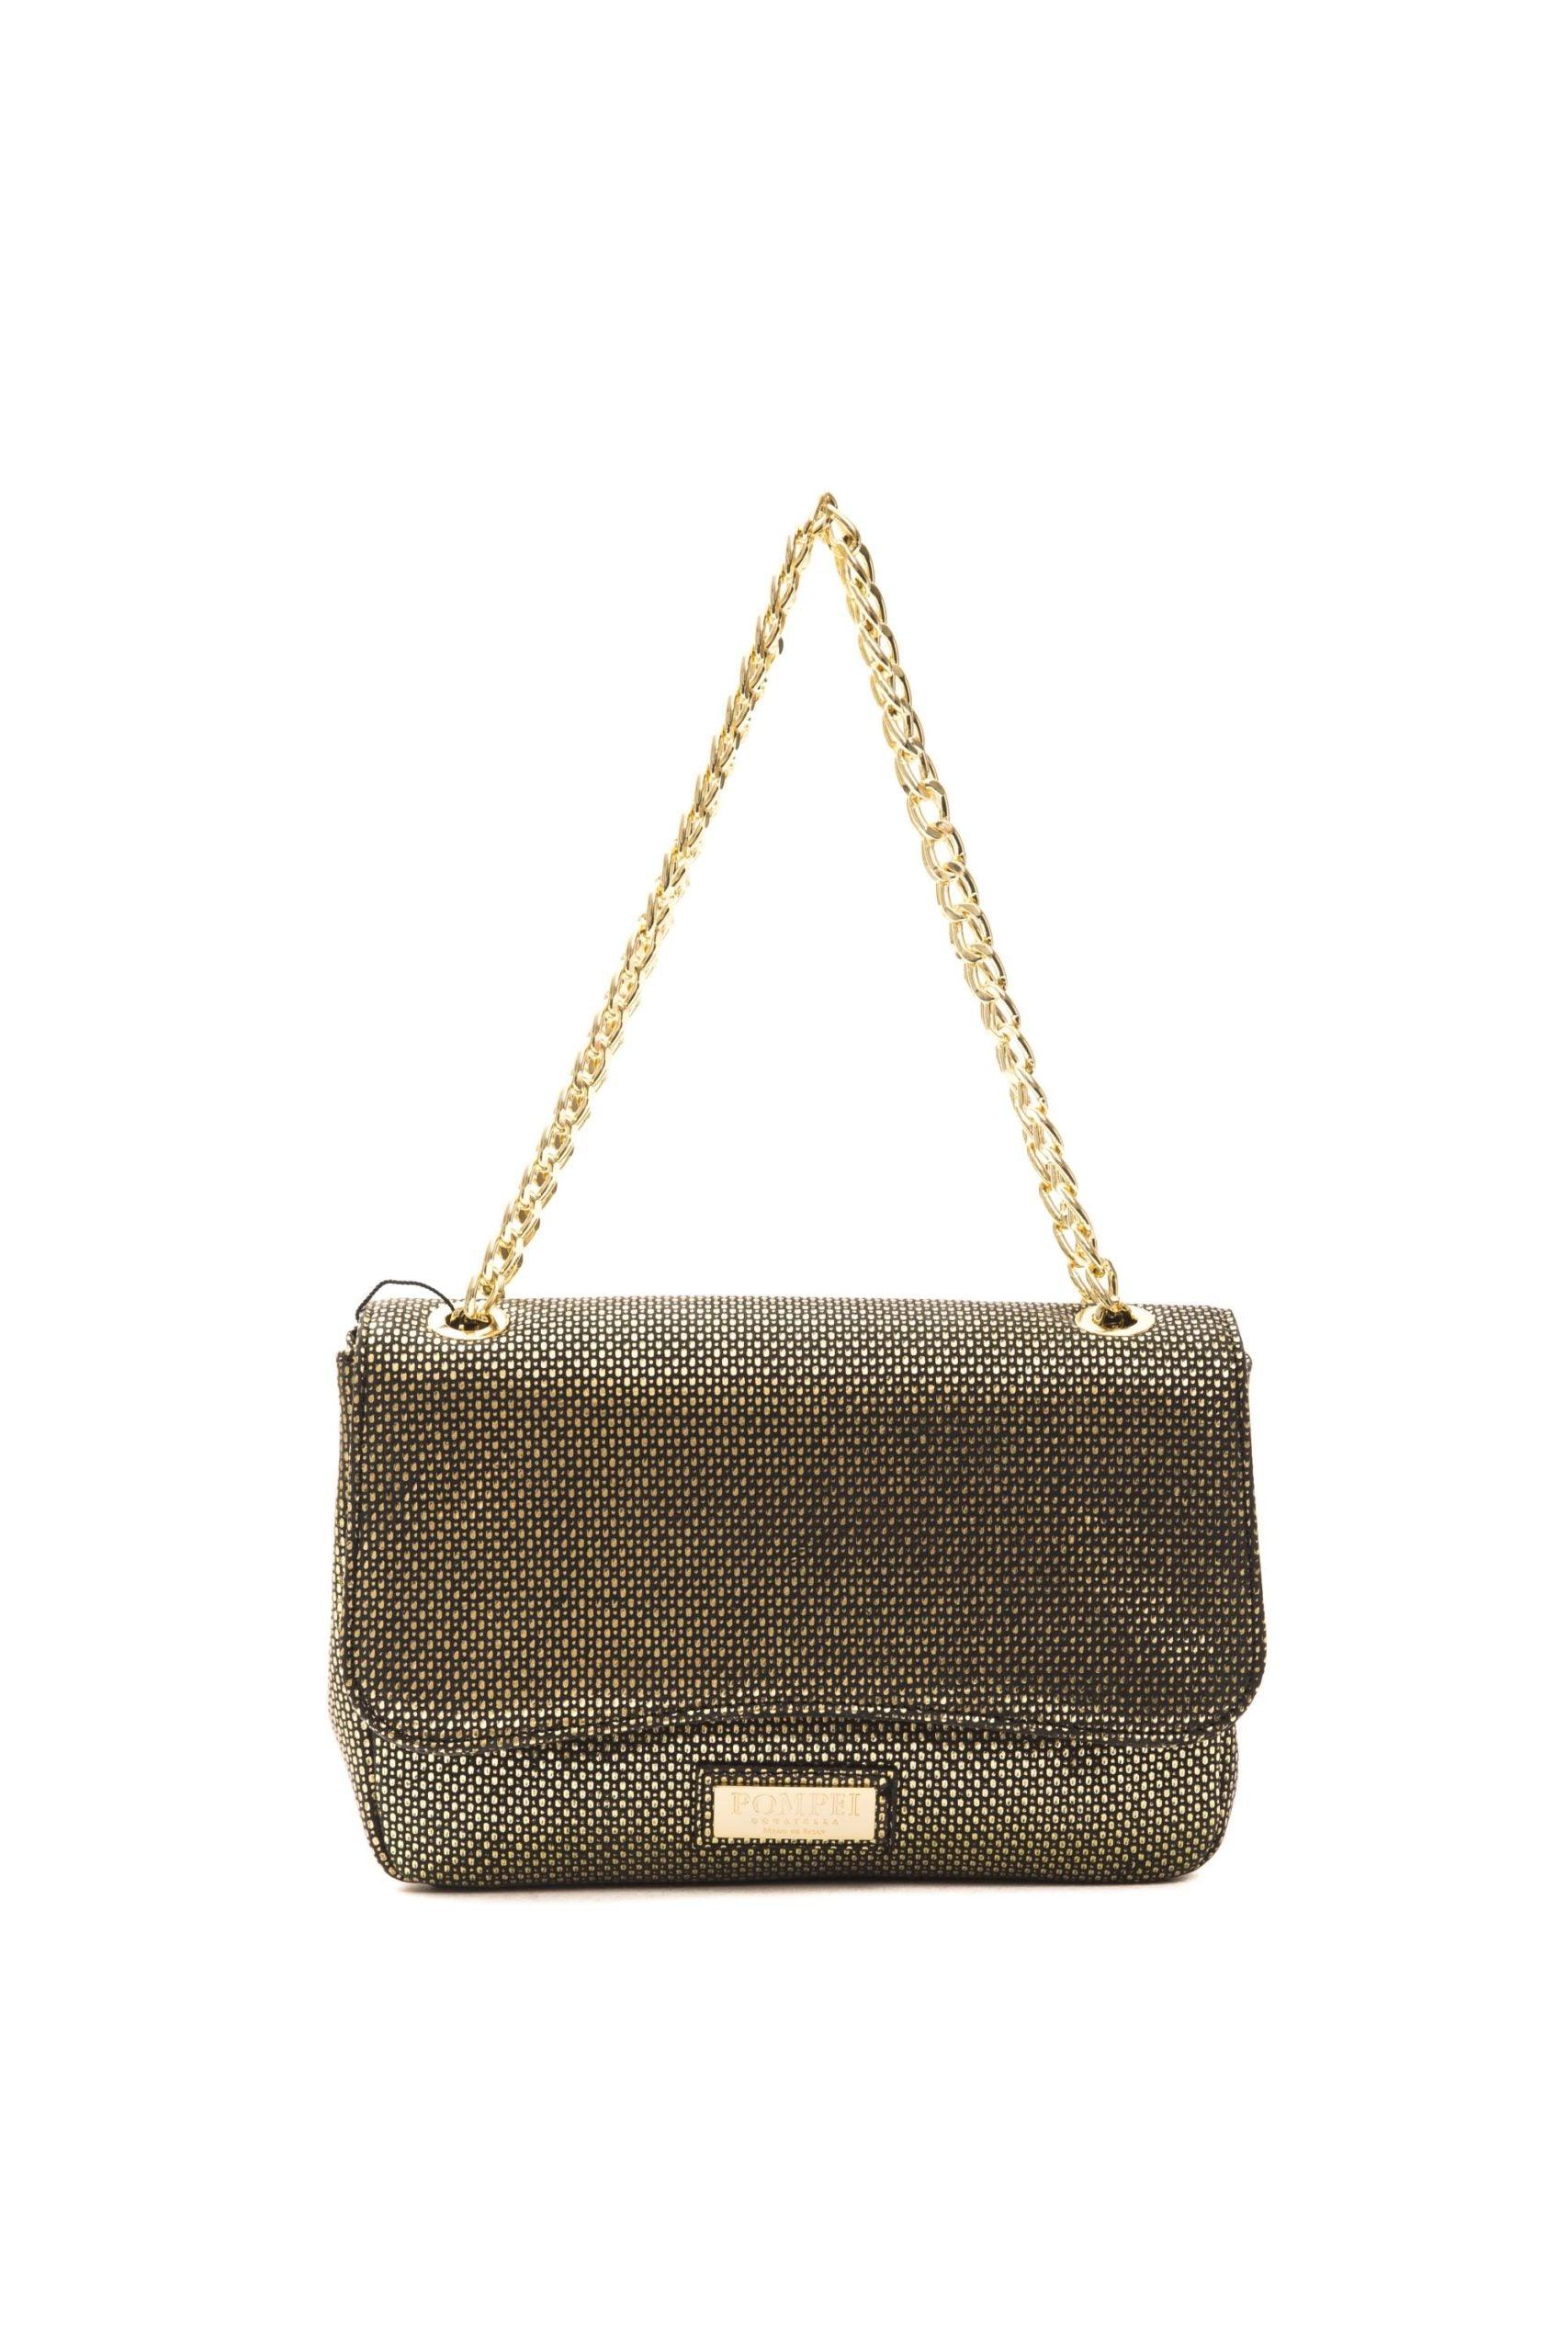 Oro Gold Crossbody Bag designed by Pompei Donatella available from Moon Behind The Hill's Women's Bags & Purses range